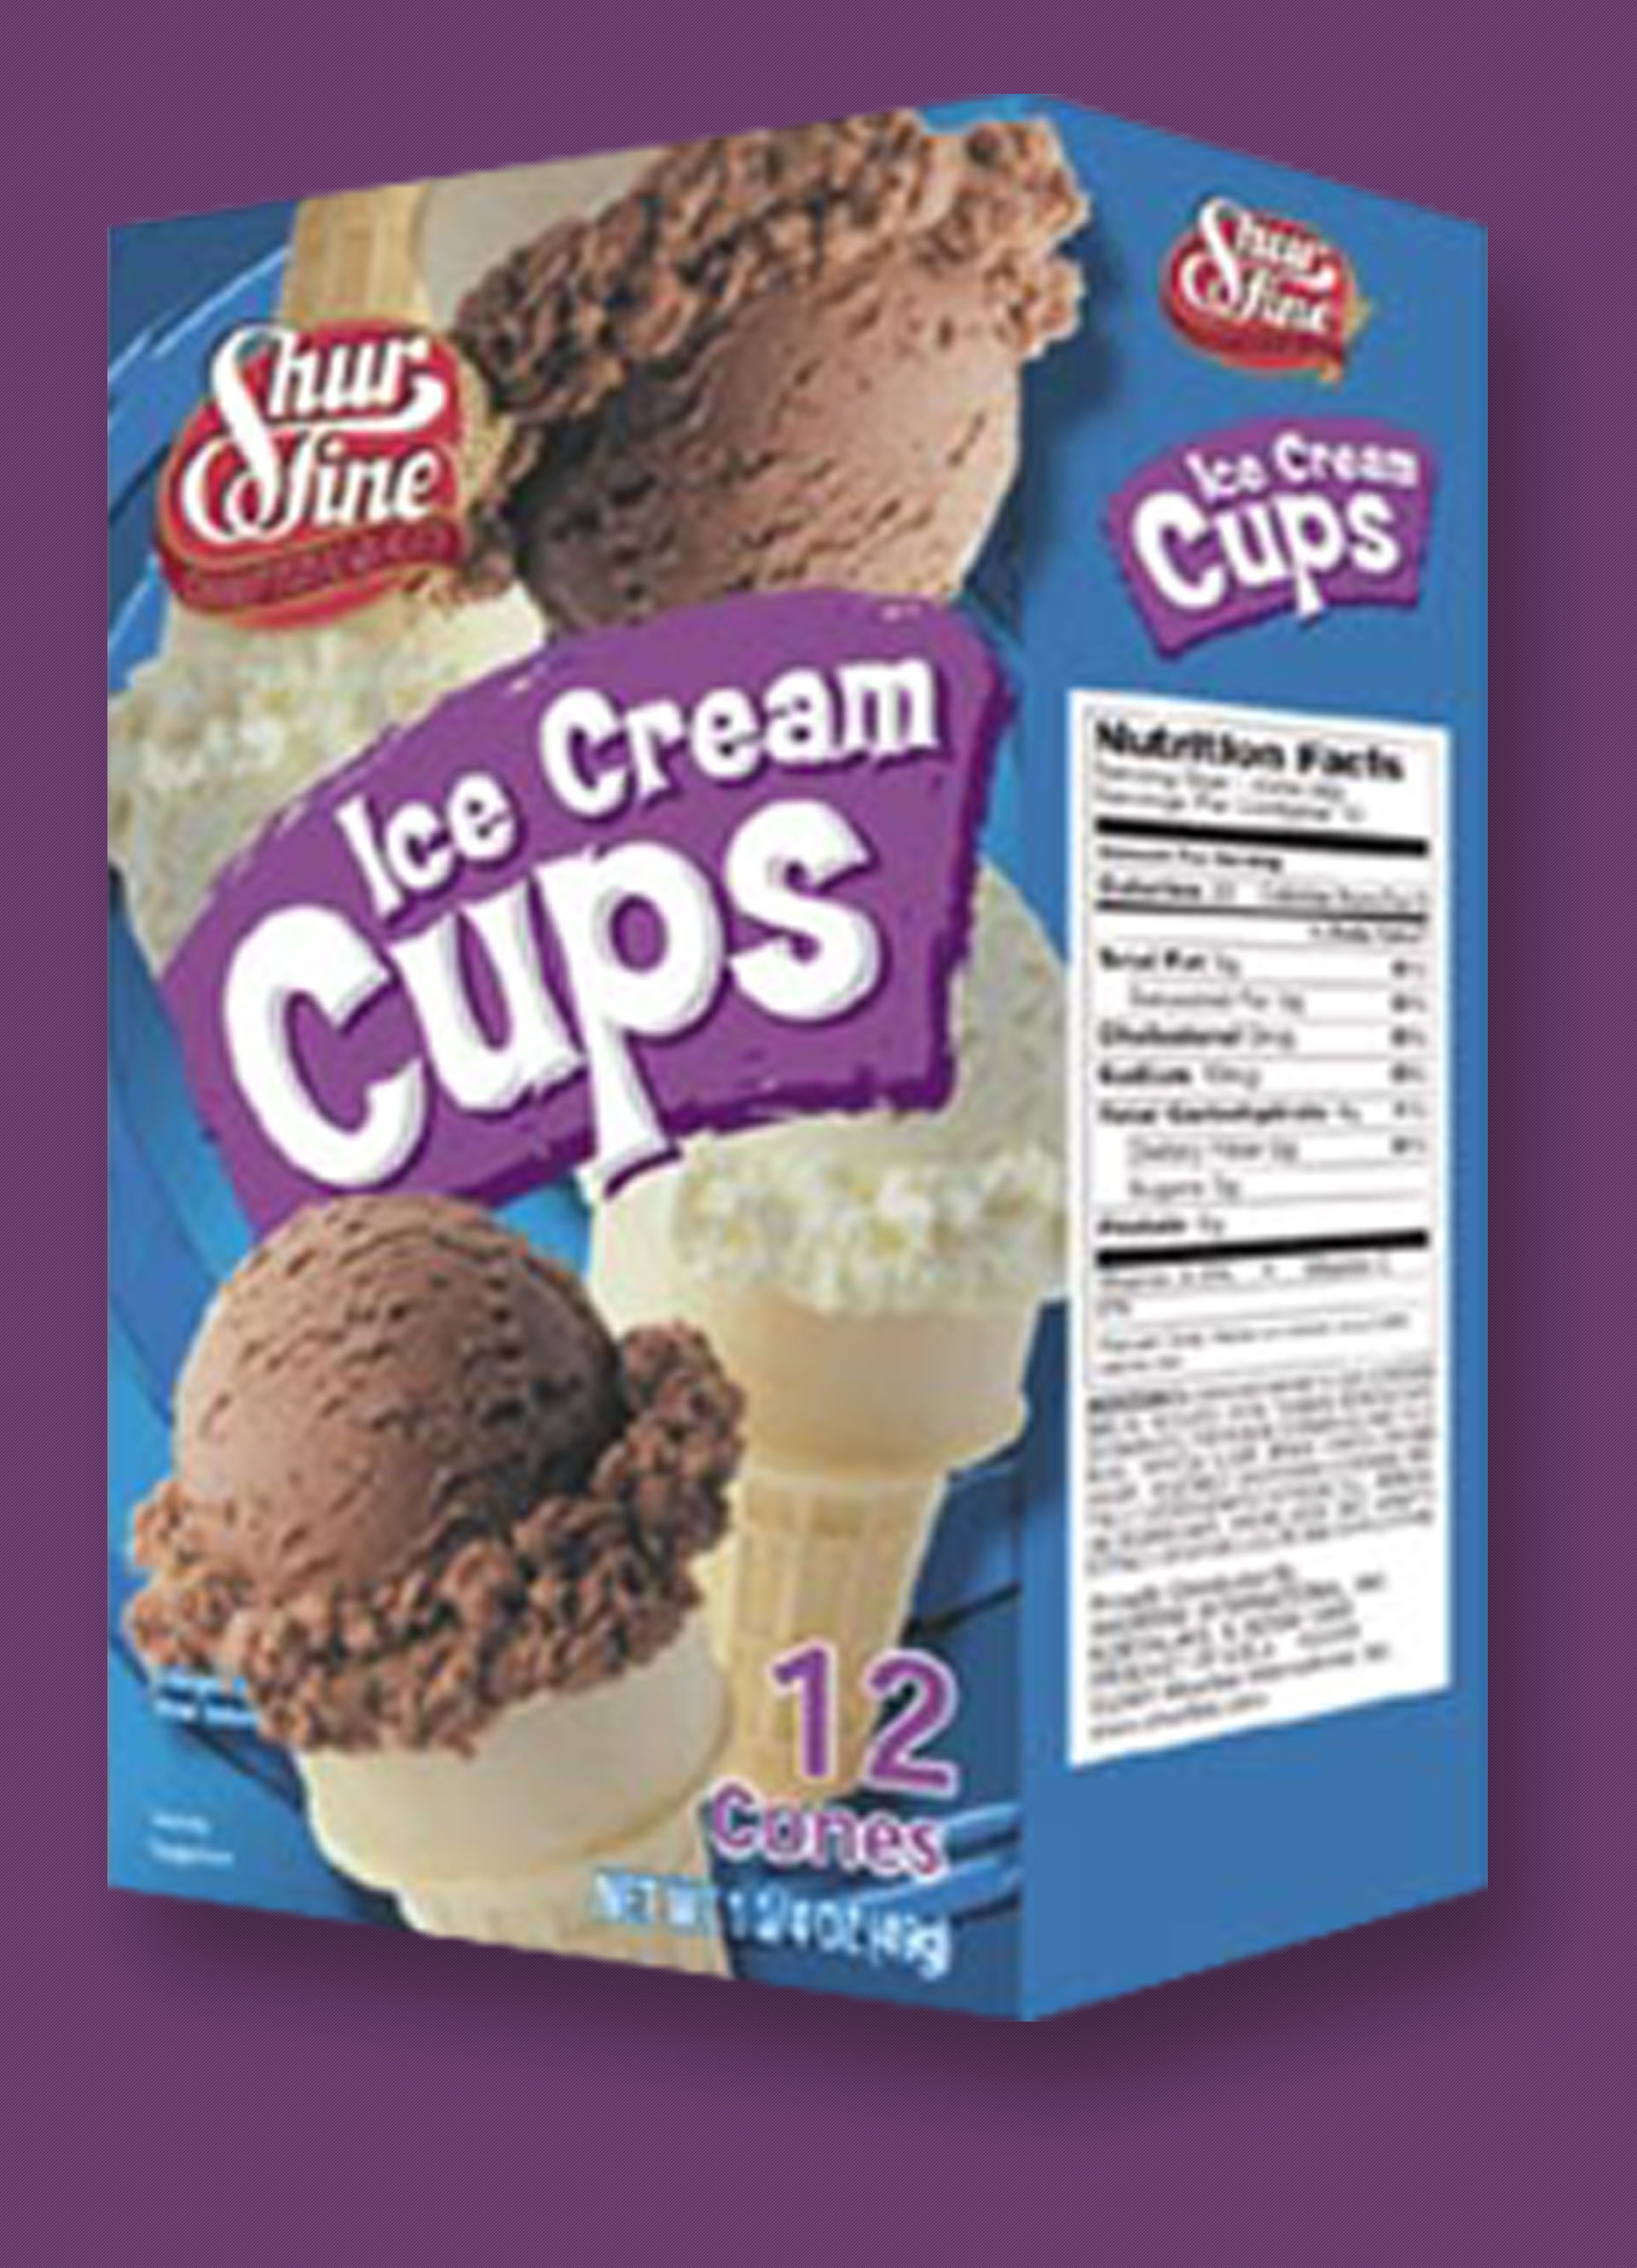 Icecream_cups_mockup_with_background